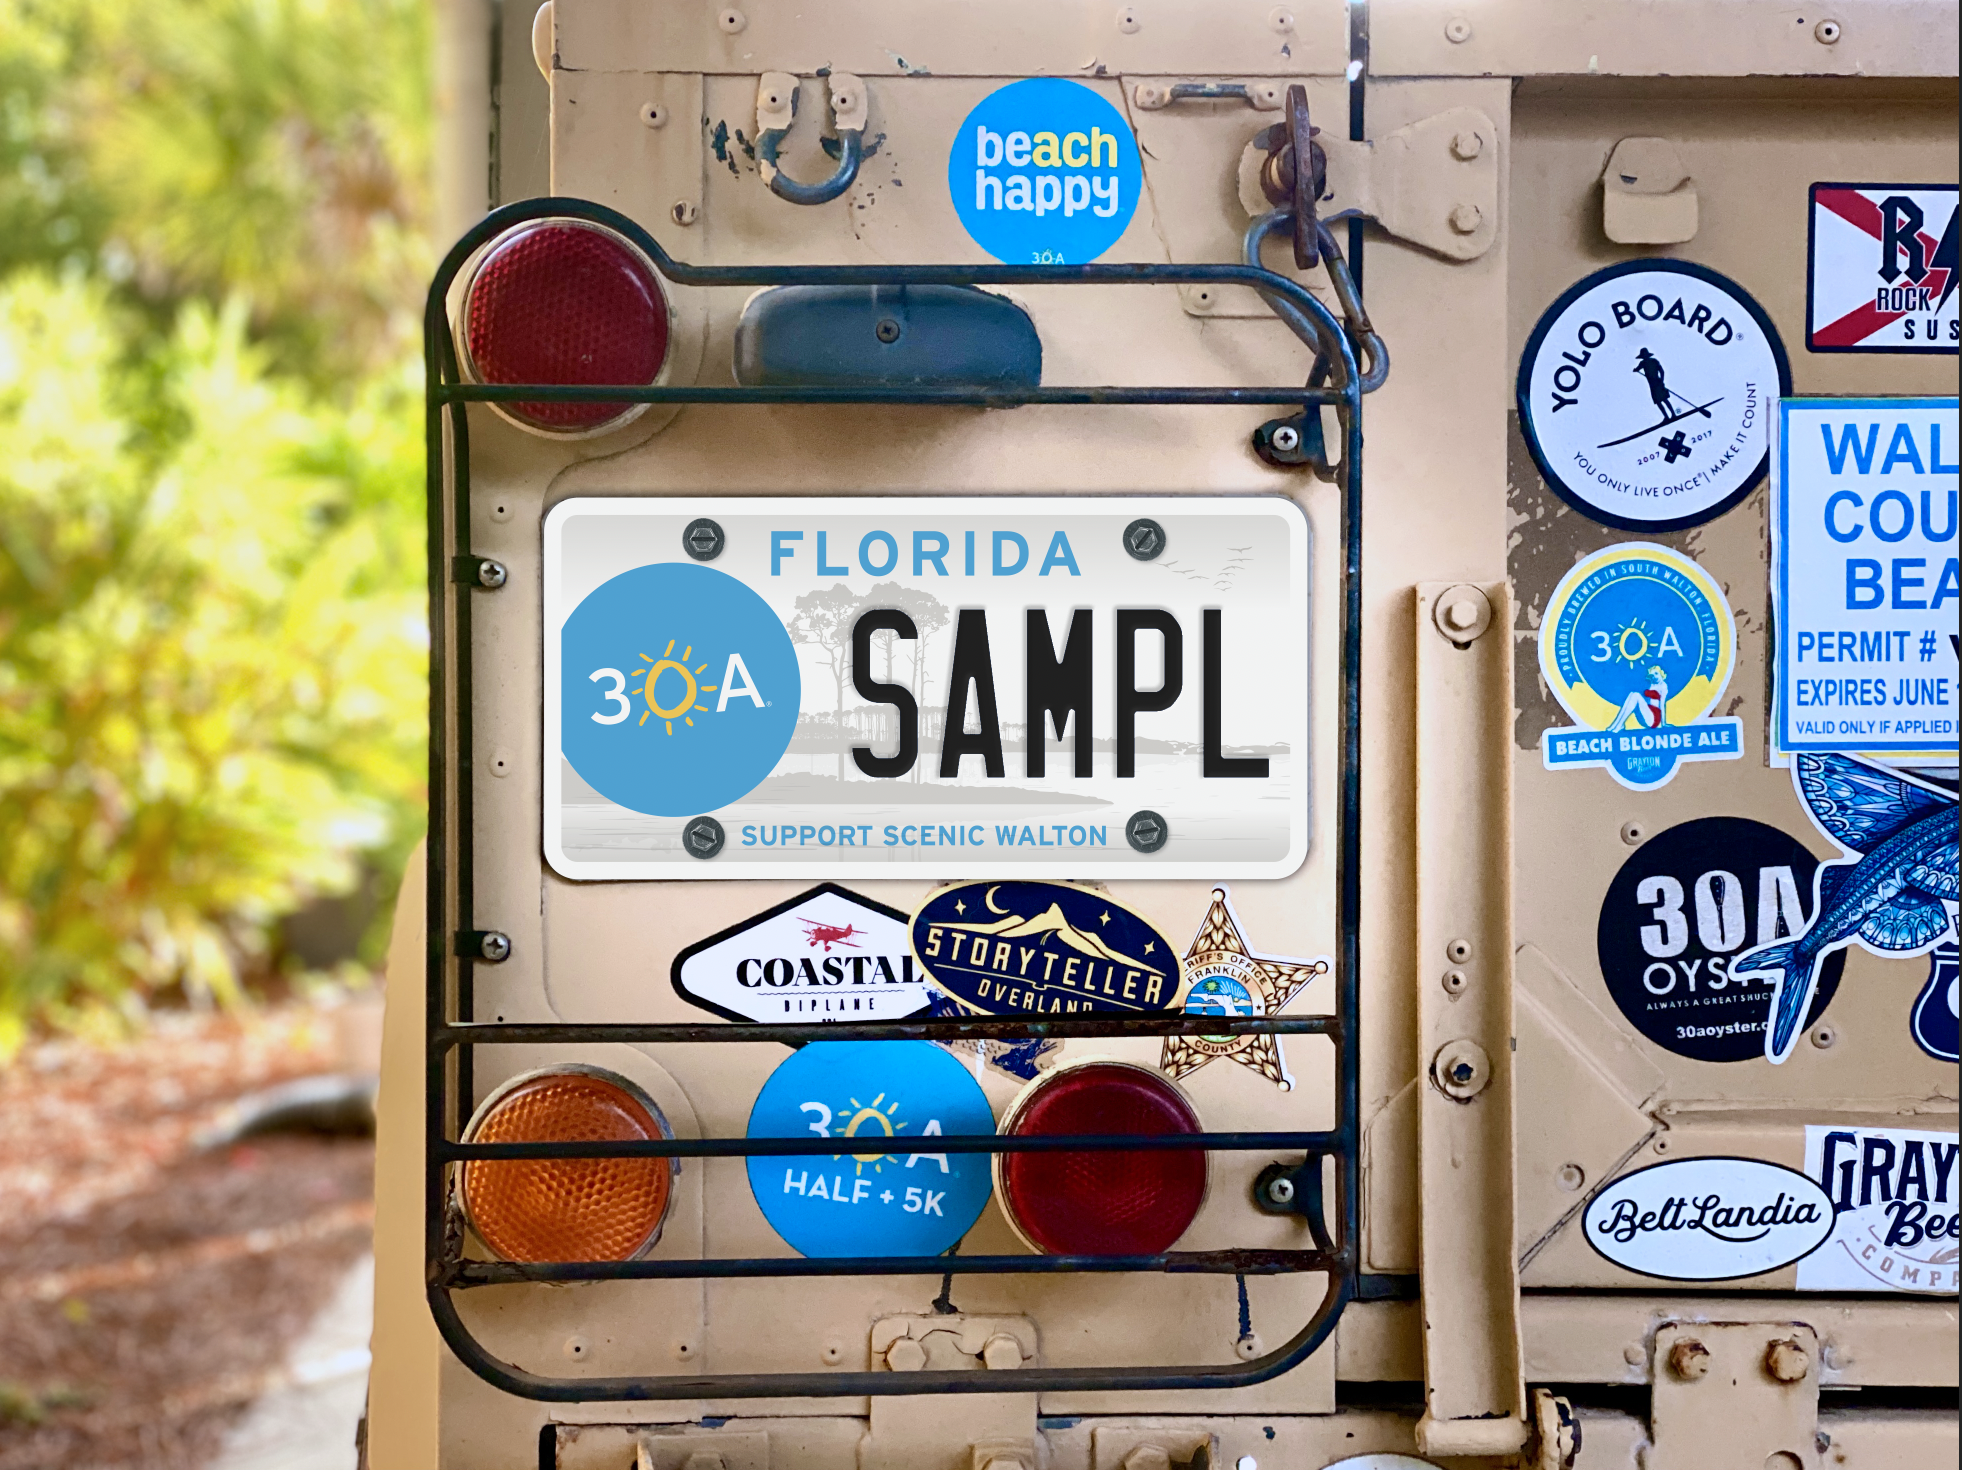 Florida’s “30A” License Plate to Help Keep Walton County Scenic